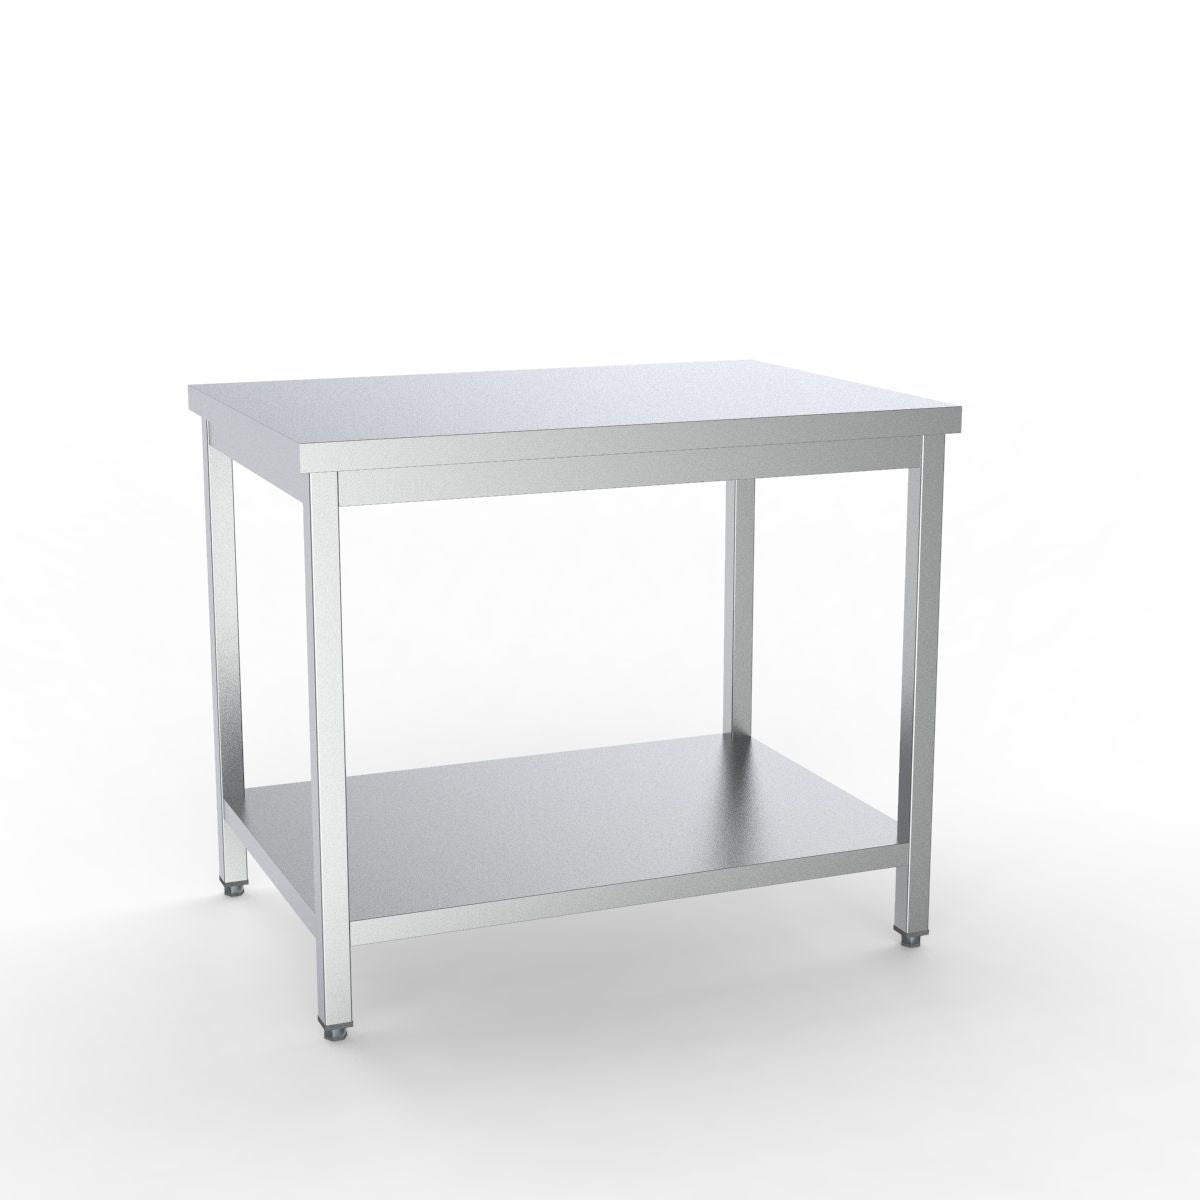 Combisteel Full 430 Stainless Steel 700 Line Worktable With Shelf 1000mm Wide - 7333.0078